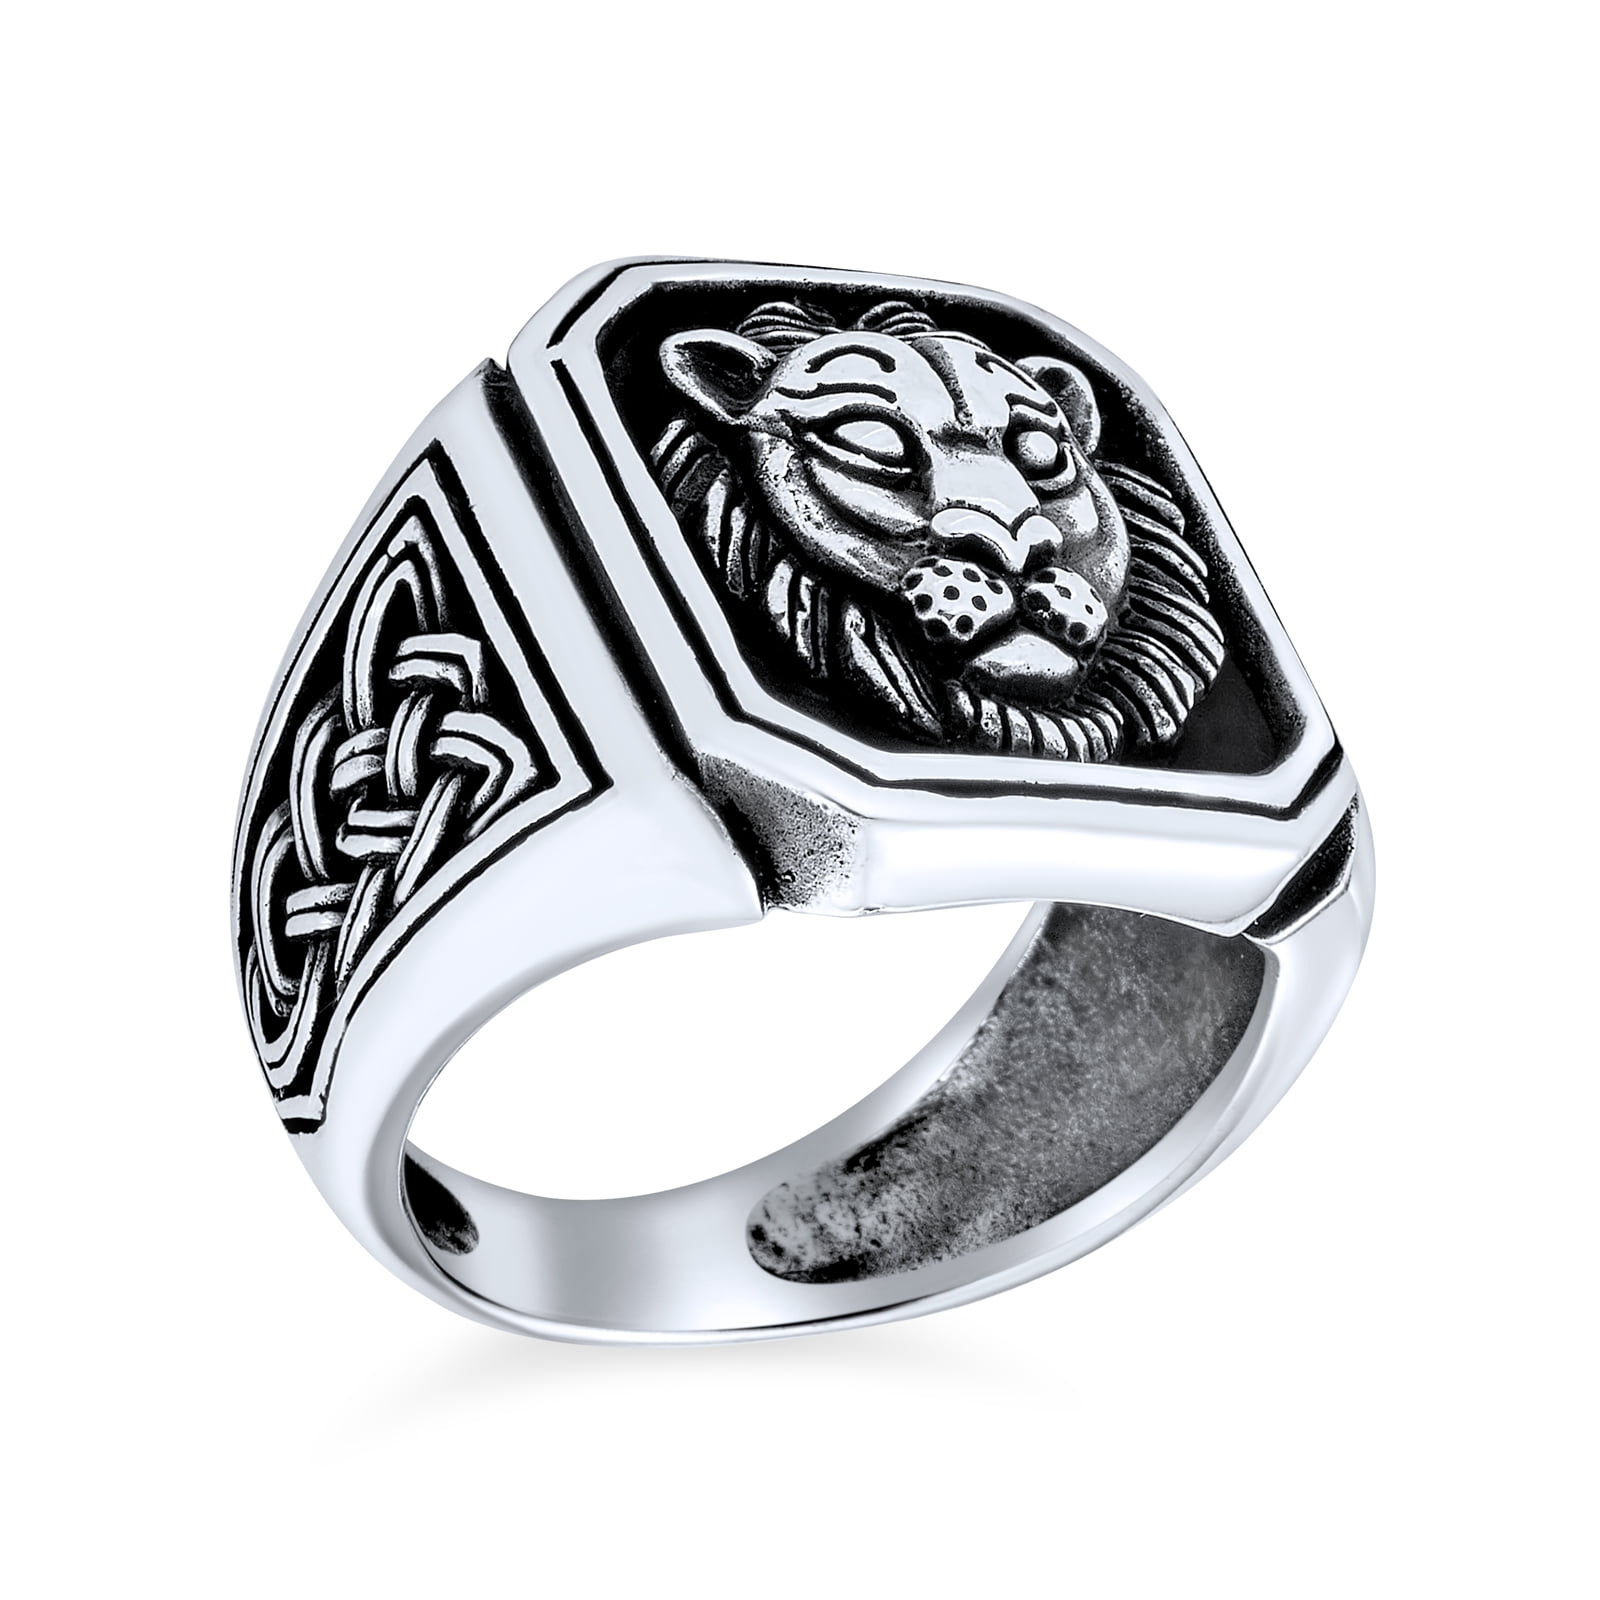 Ring of the Witch-King from The Lord of the Rings – BJS Inc.